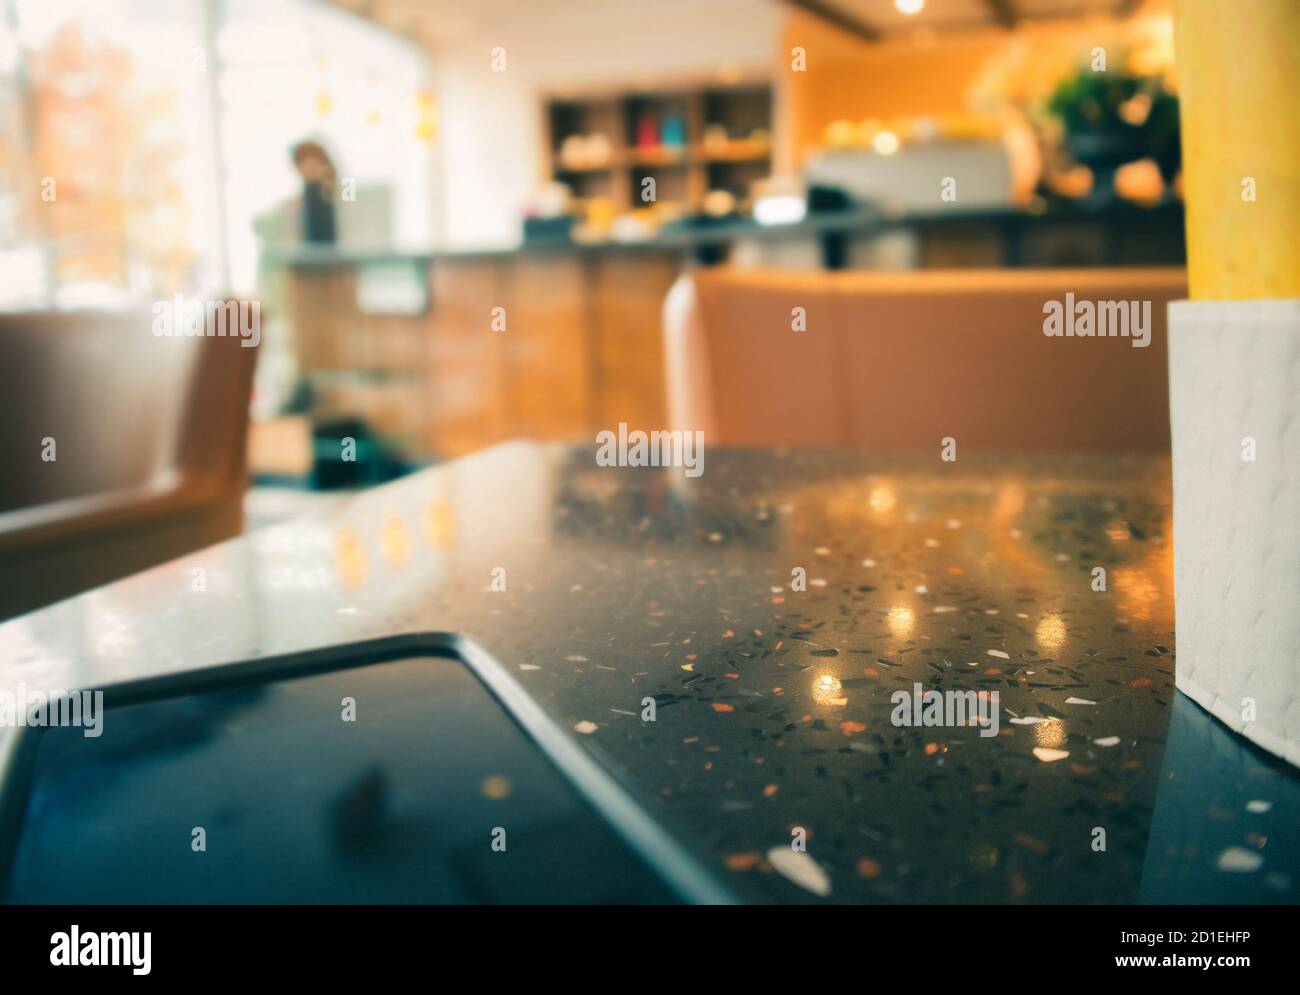 Modern blurred coffee shop Scene. Phone and coffee cup on table as foreground. Soft blurred sofa chair, bar / counter shelves and window front in the Stock Photo